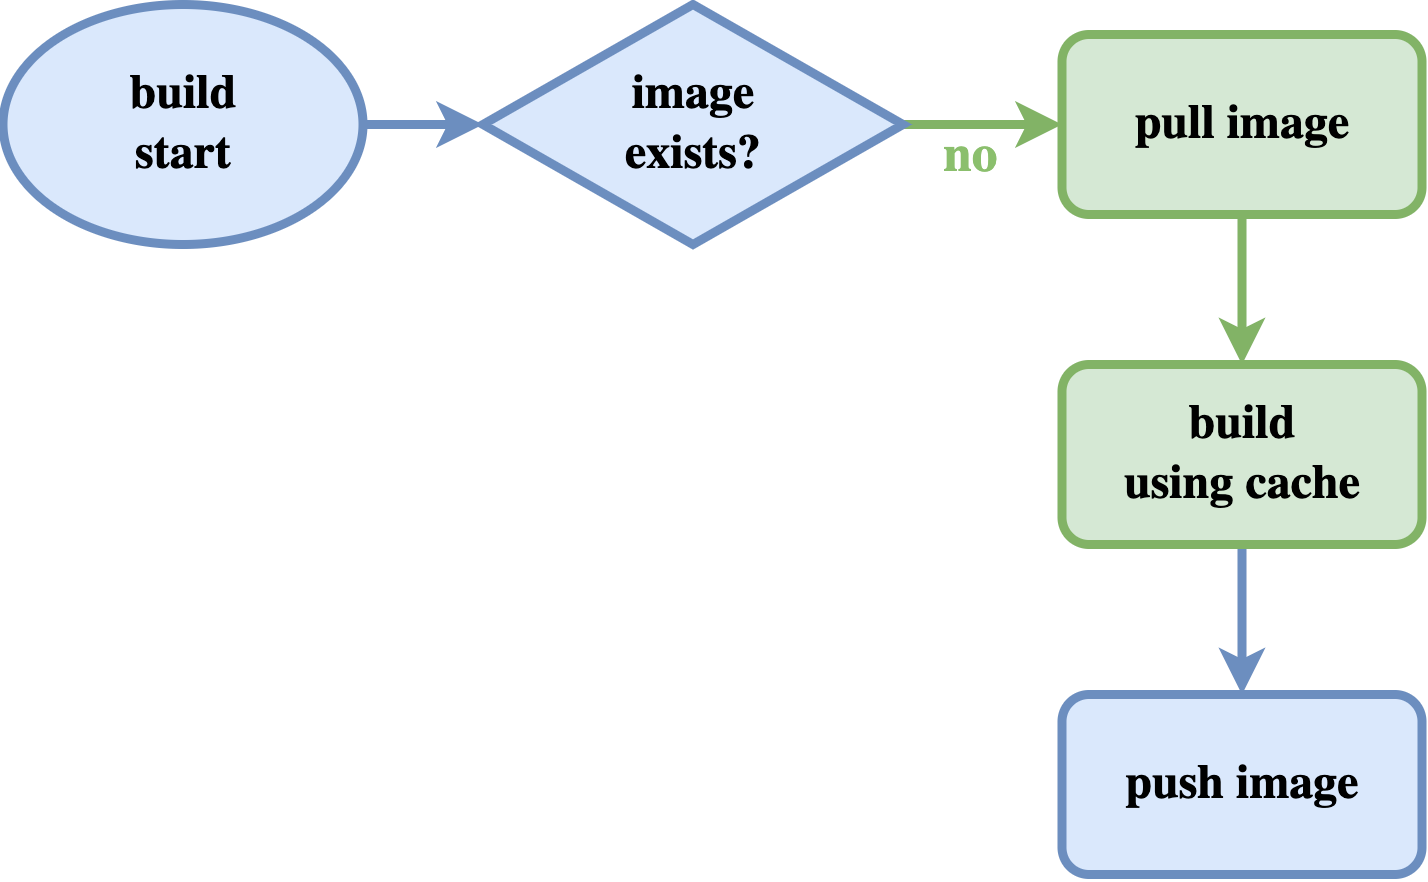 Speed up Docker image building process by pulling the image first